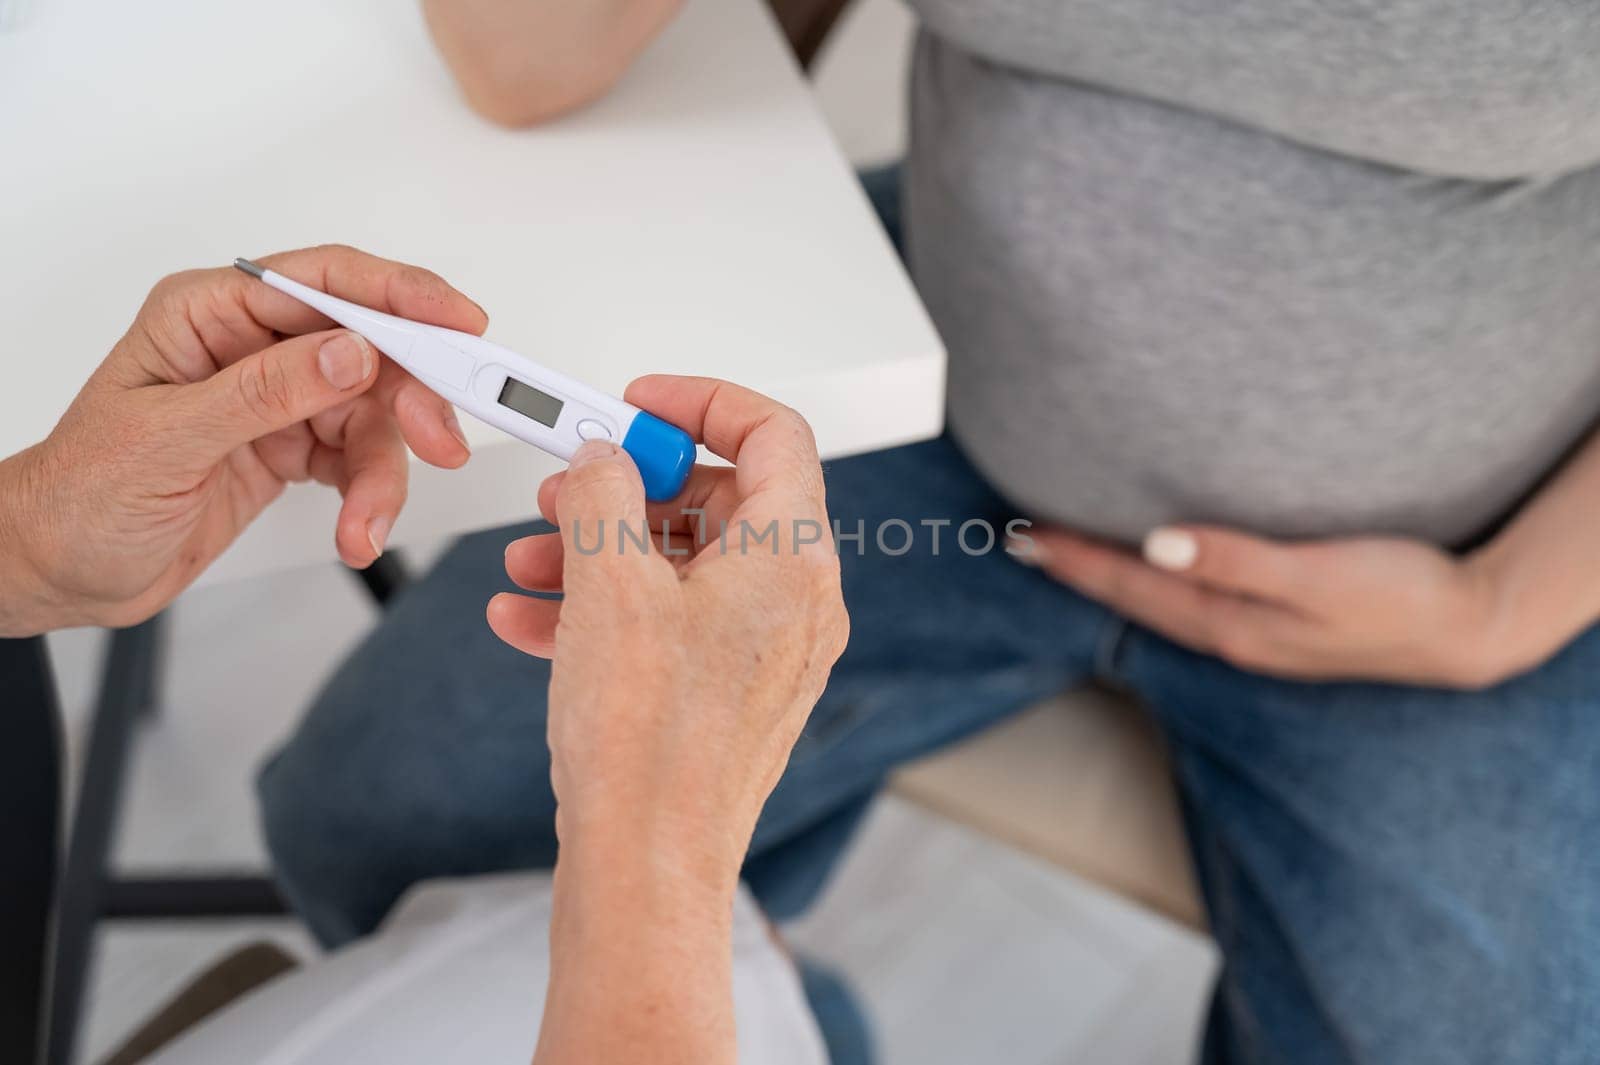 A pregnant woman visits a doctor. Therapist holding an electronic thermometer